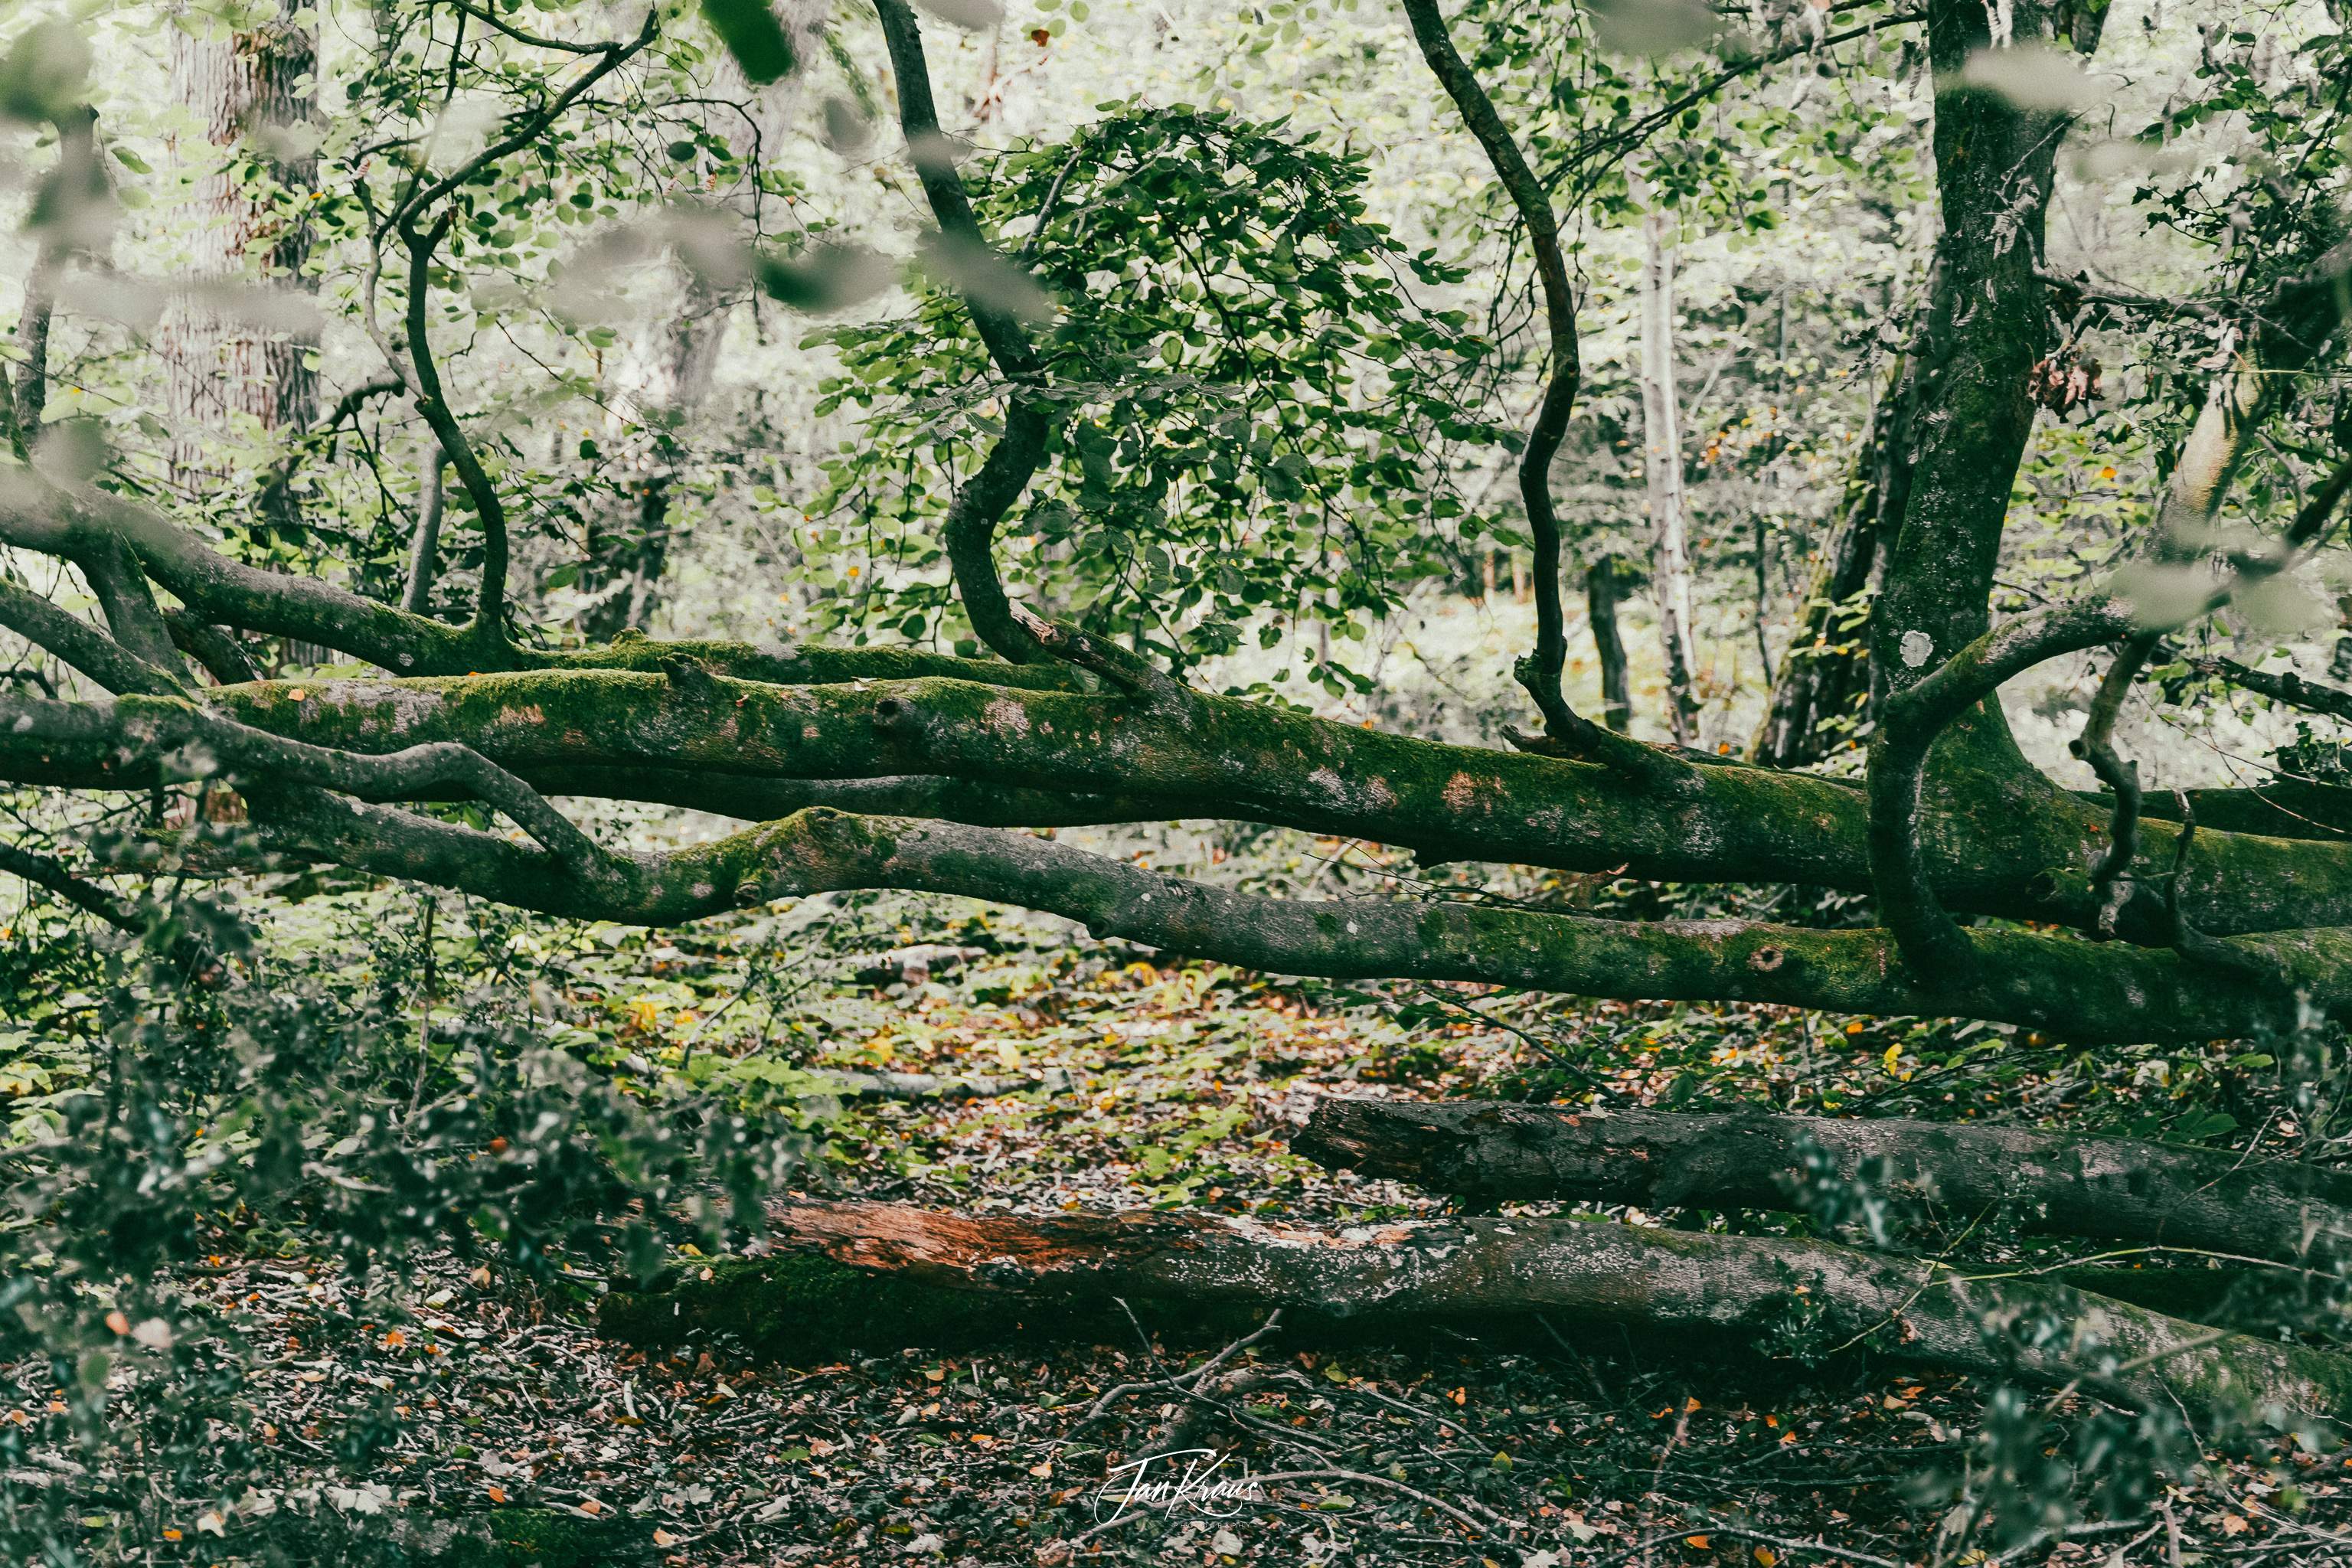 A fallen tree somewhere along the path, Weald, Sussex, England, UK